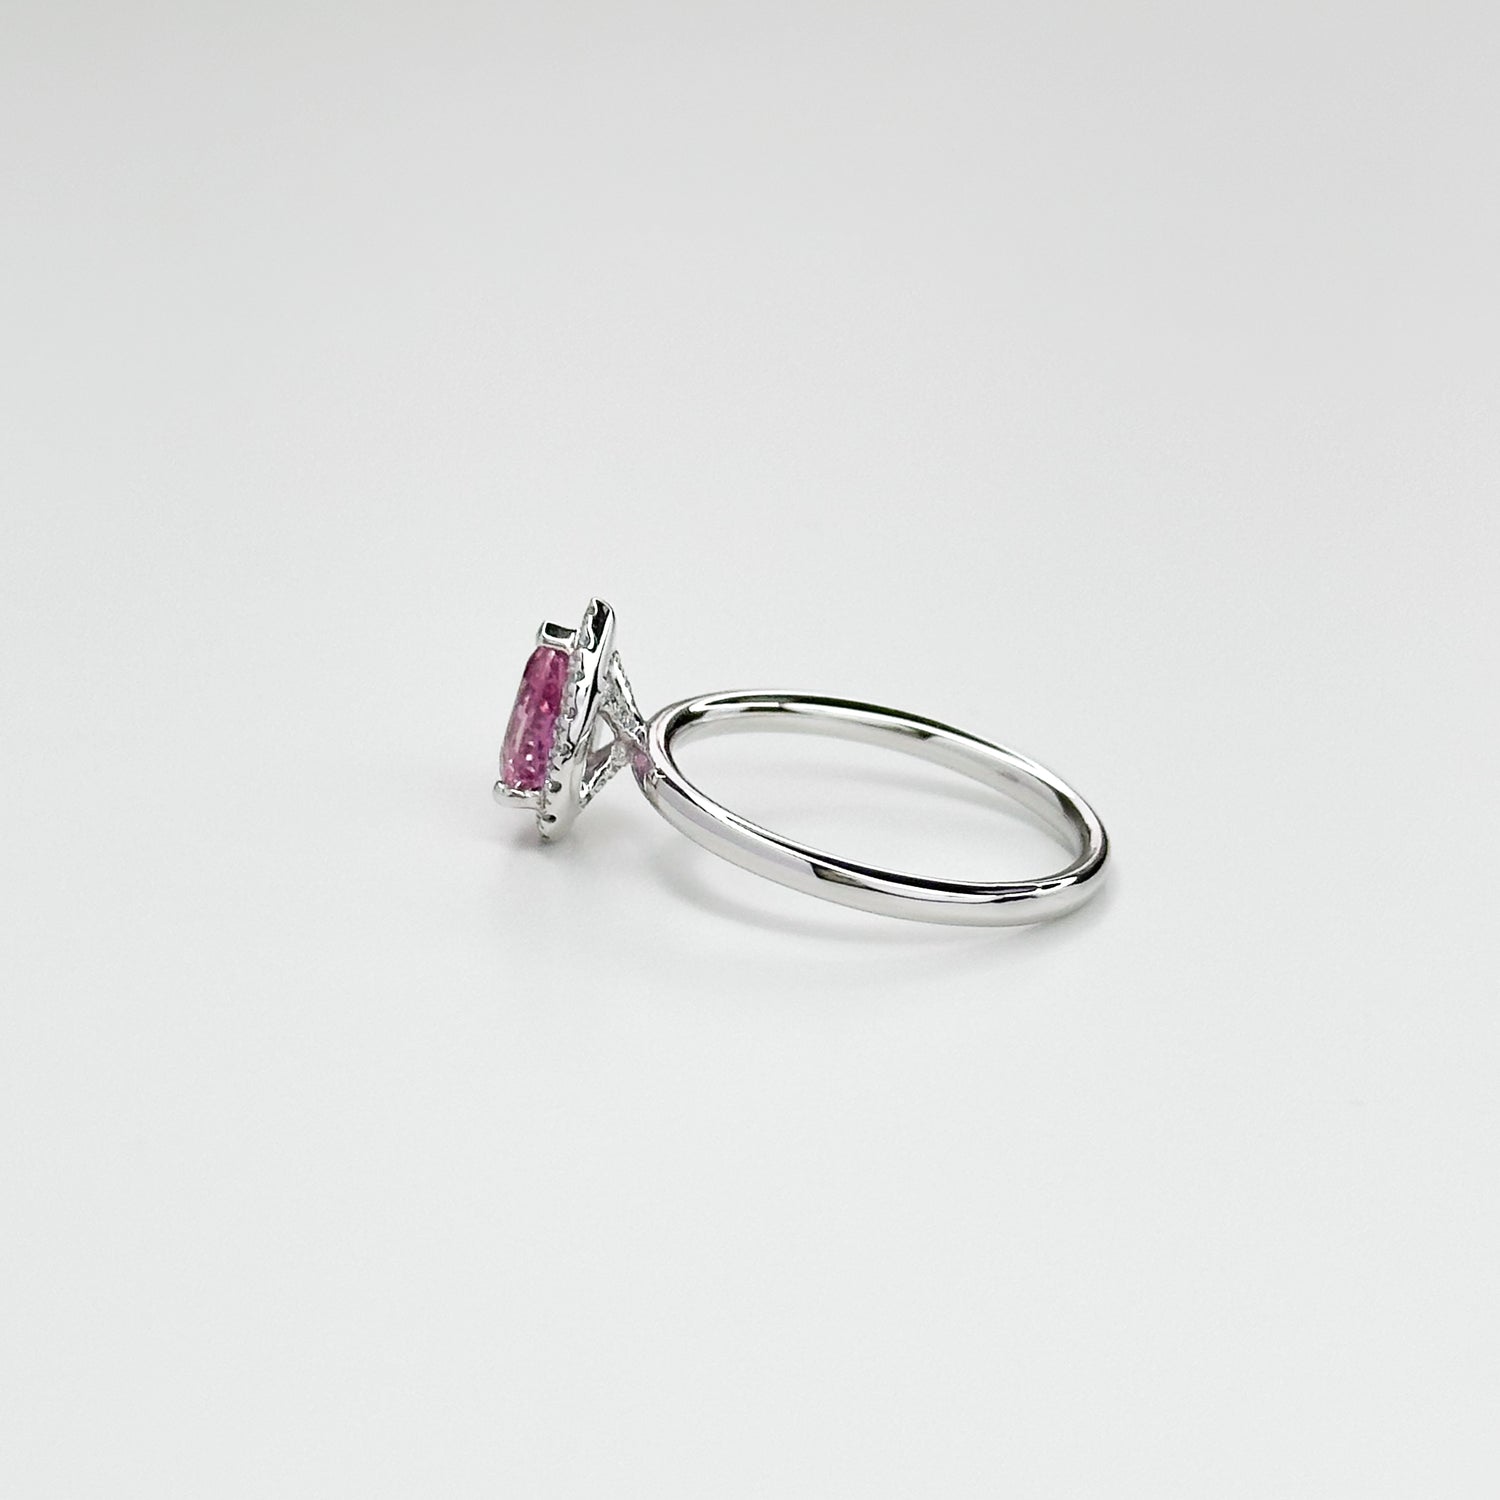 0.82ct Pink Pear Shape Sapphire Ring